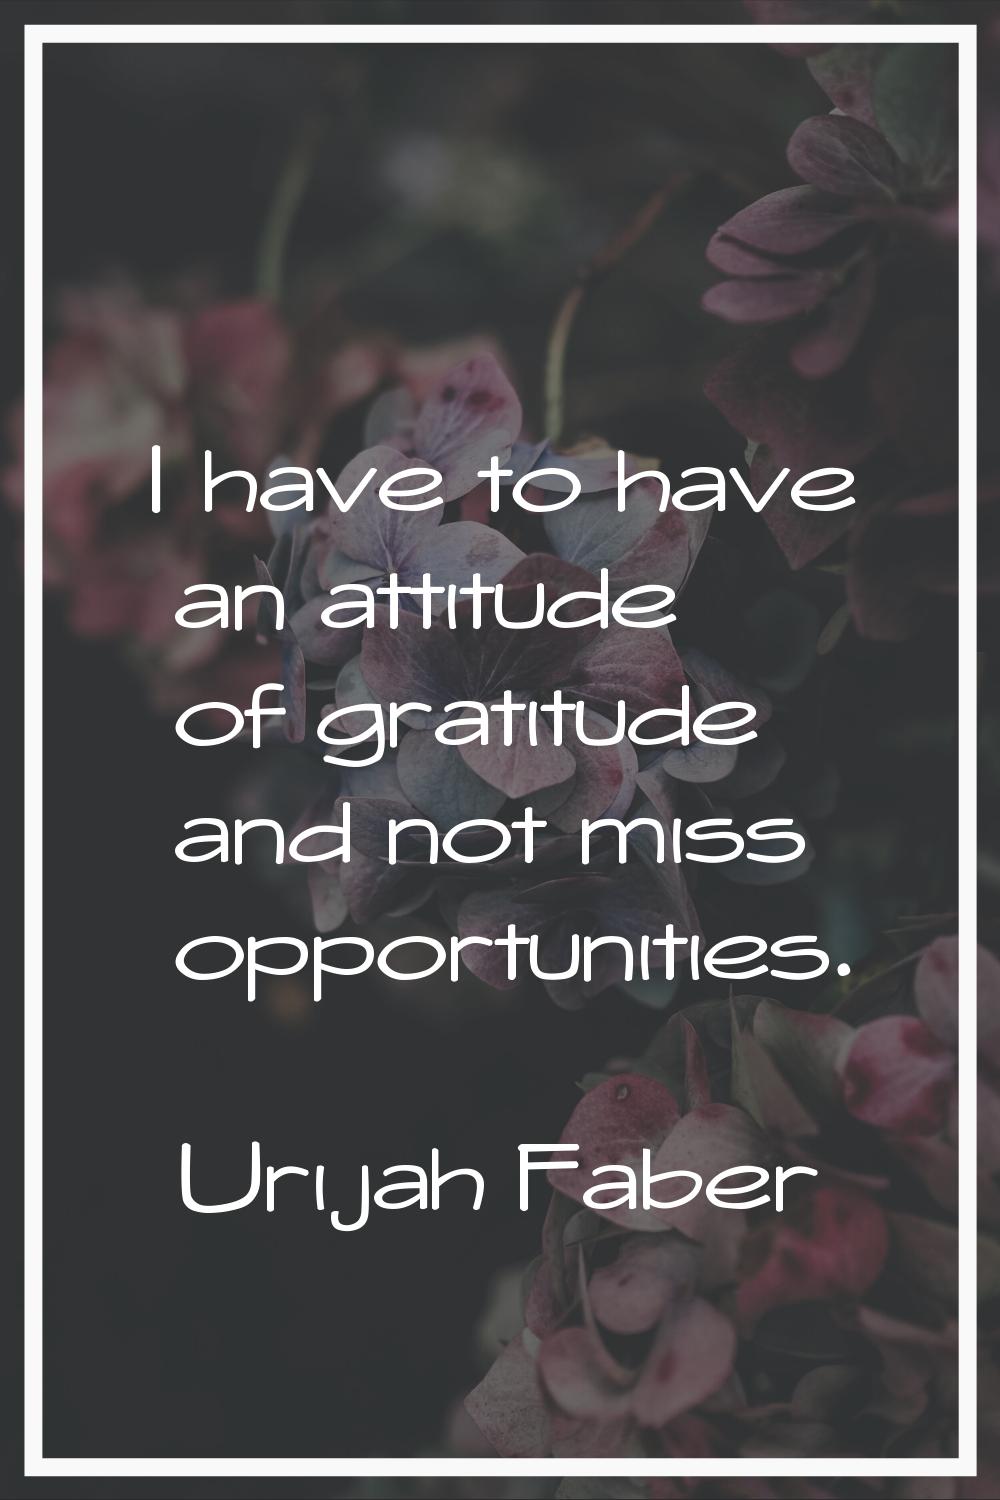 I have to have an attitude of gratitude and not miss opportunities.